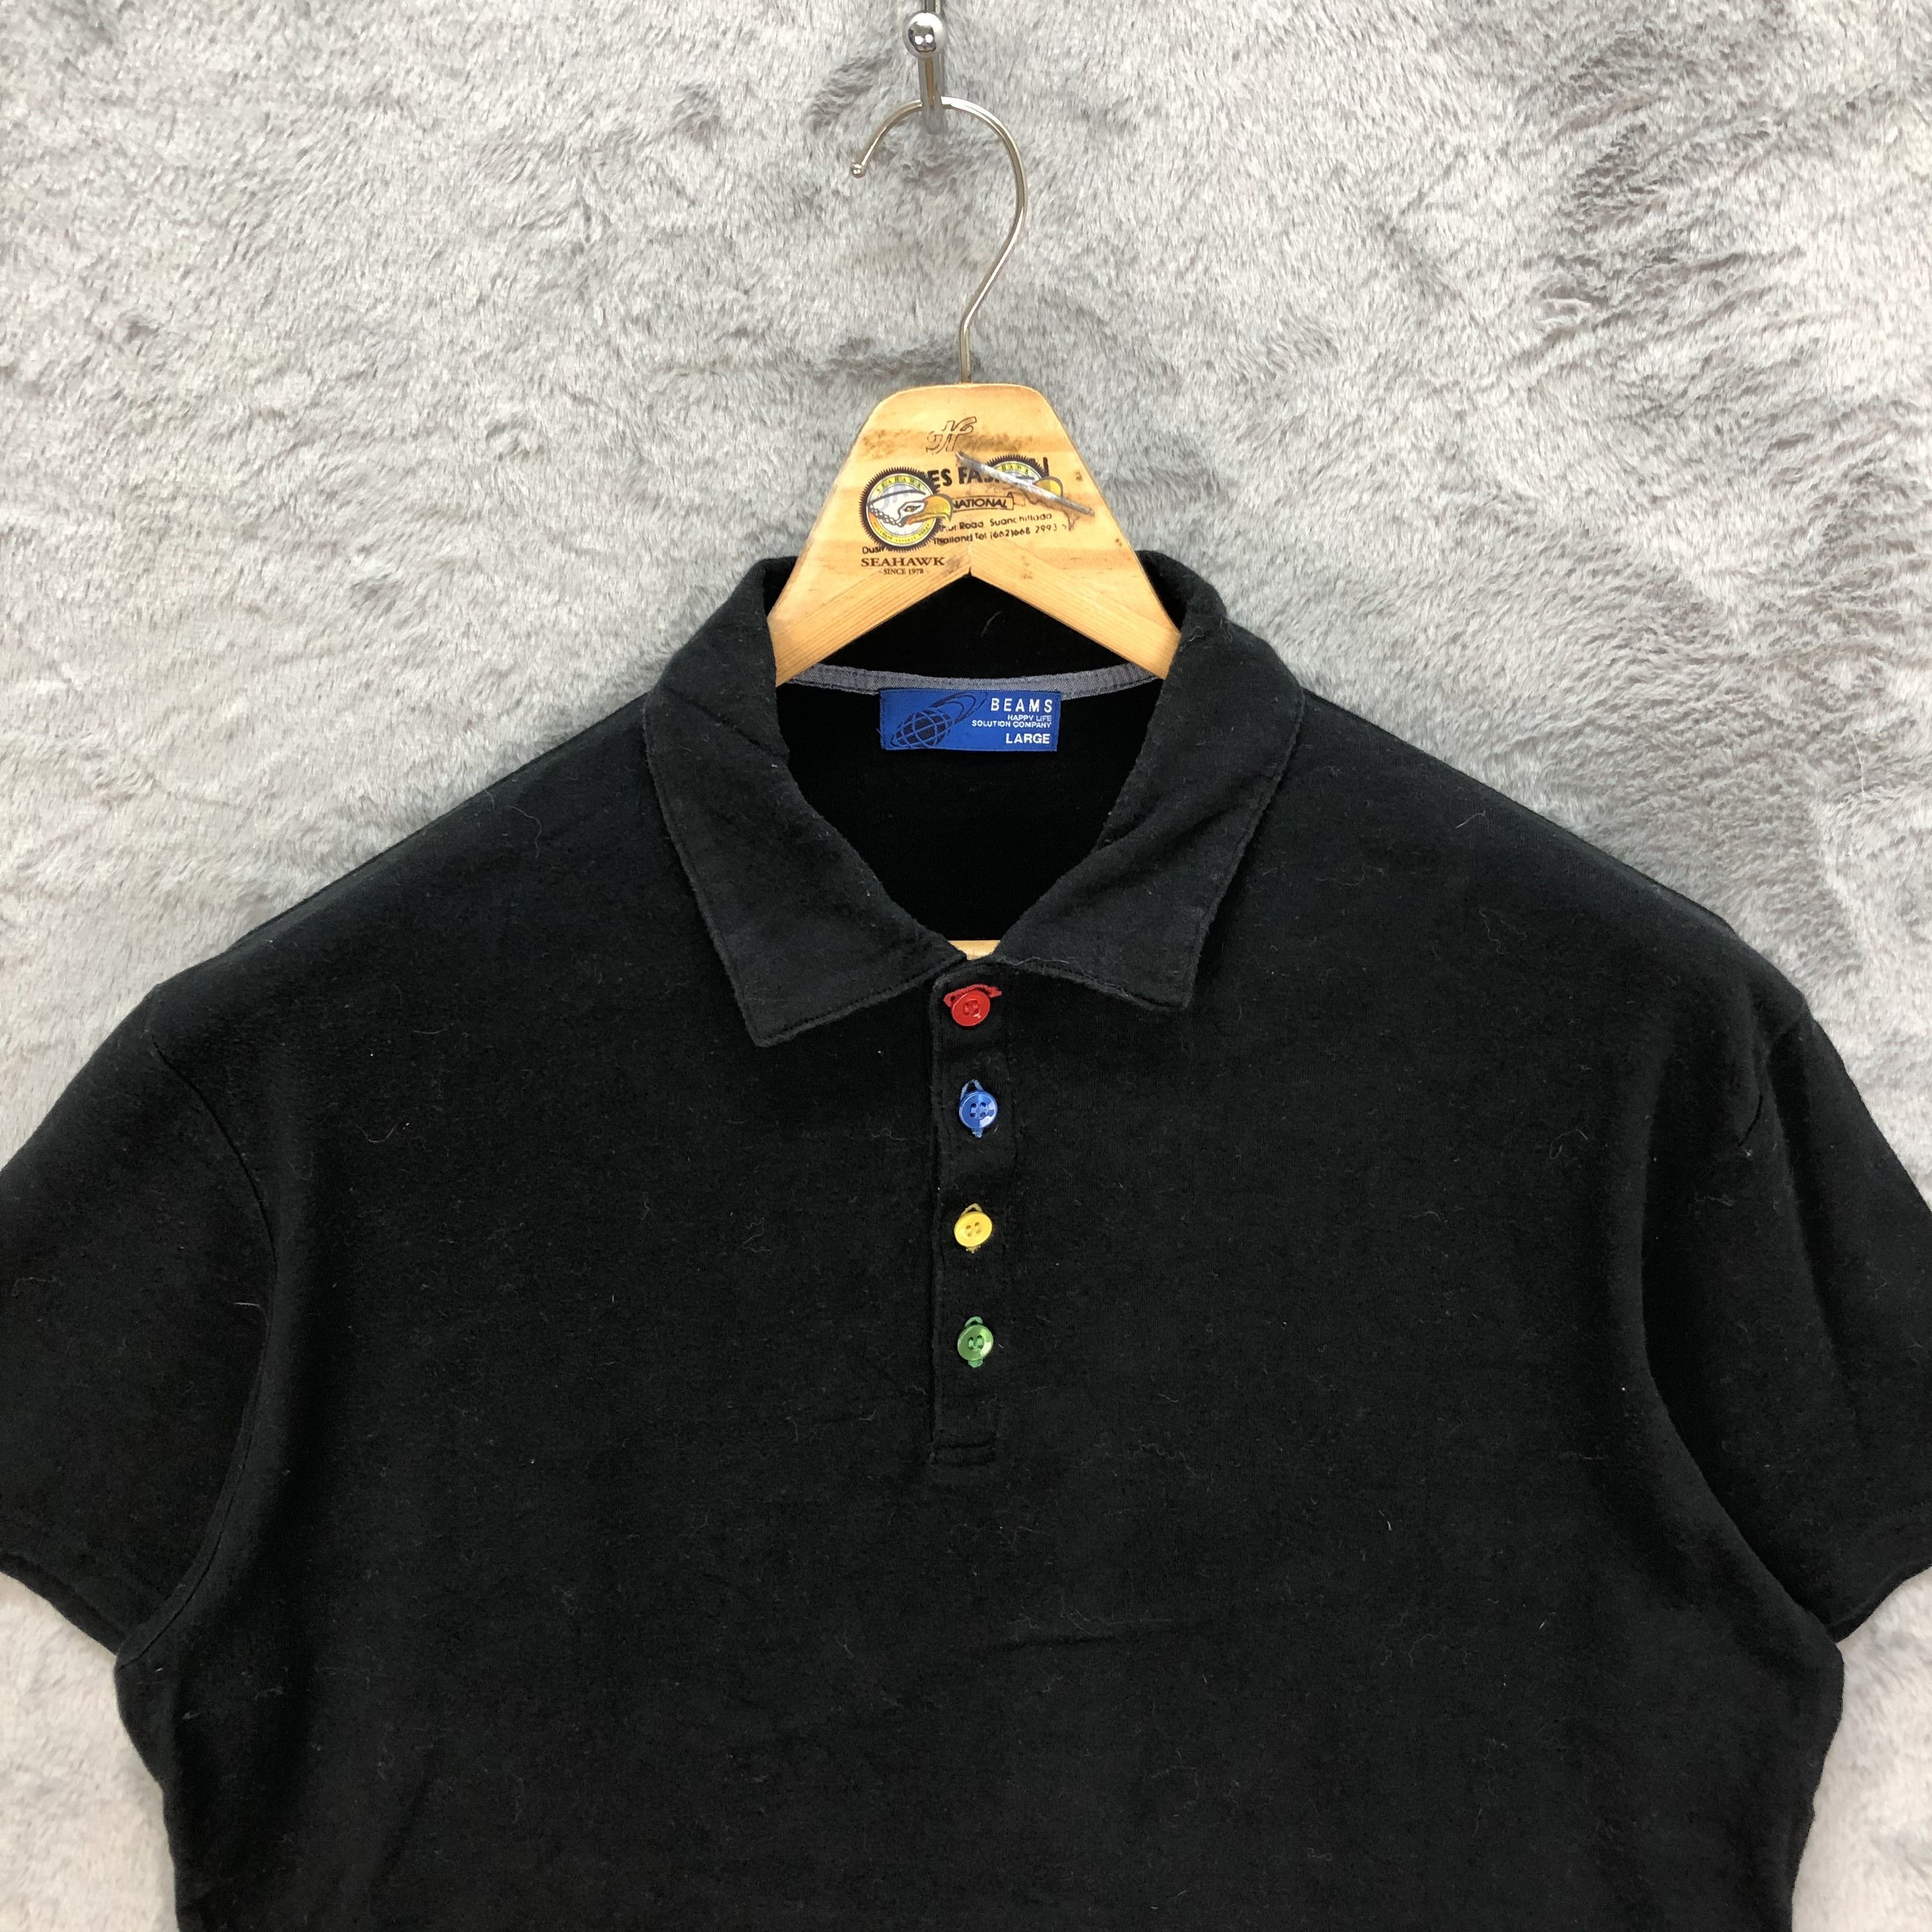 BEAMS Made in Japan Colorful Button Polo Shirt #4762-167 - 2